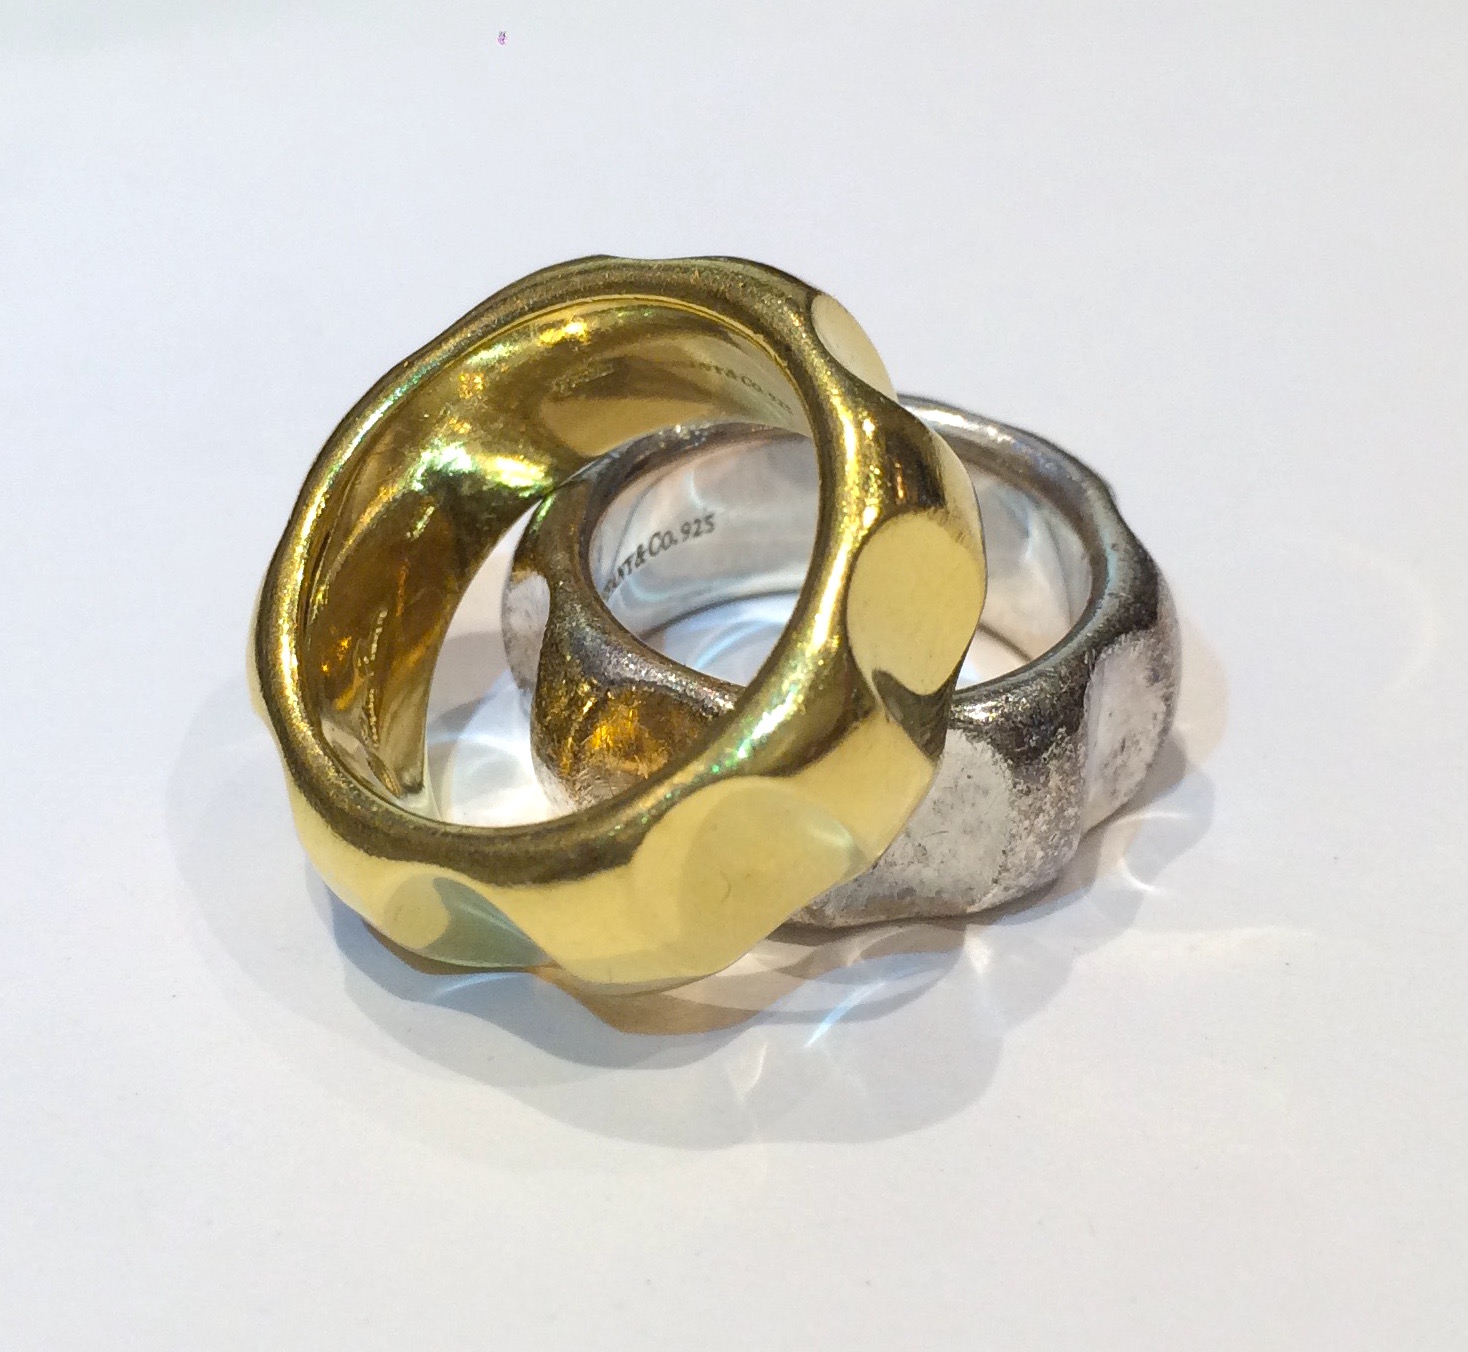 Paloma Picasso for Tiffany & Co. “Faceted” rings, one ring in 18K gold, the other in sterling silver, both signed, c. 1980’s